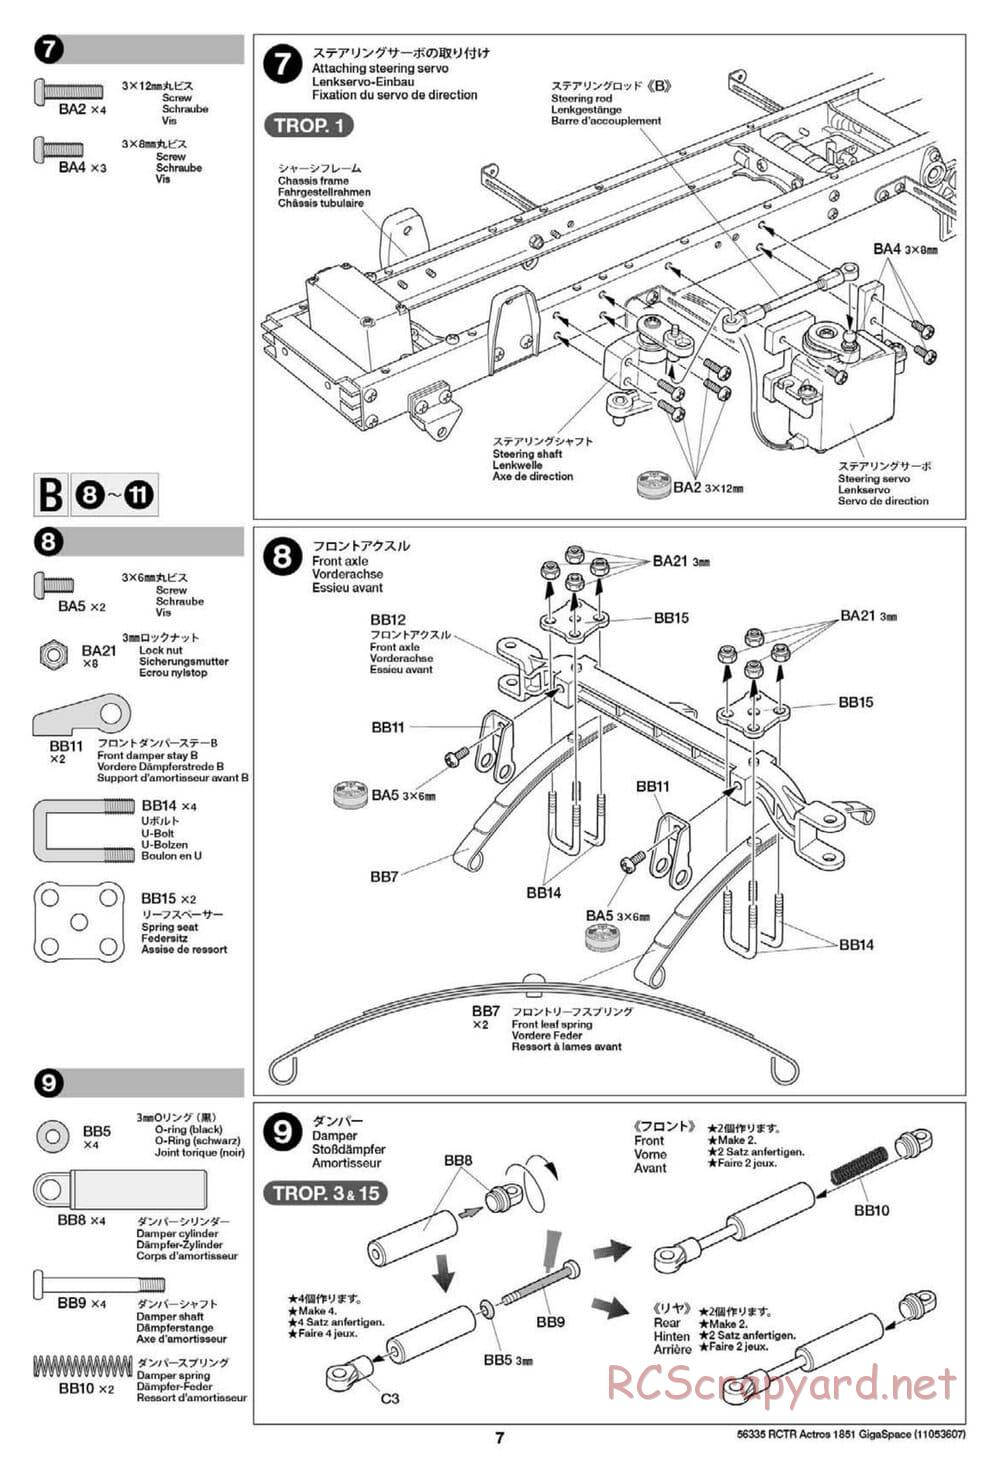 Tamiya - Mercedes-Benz Actros 1851 Gigaspace Tractor Truck Chassis - Manual - Page 7